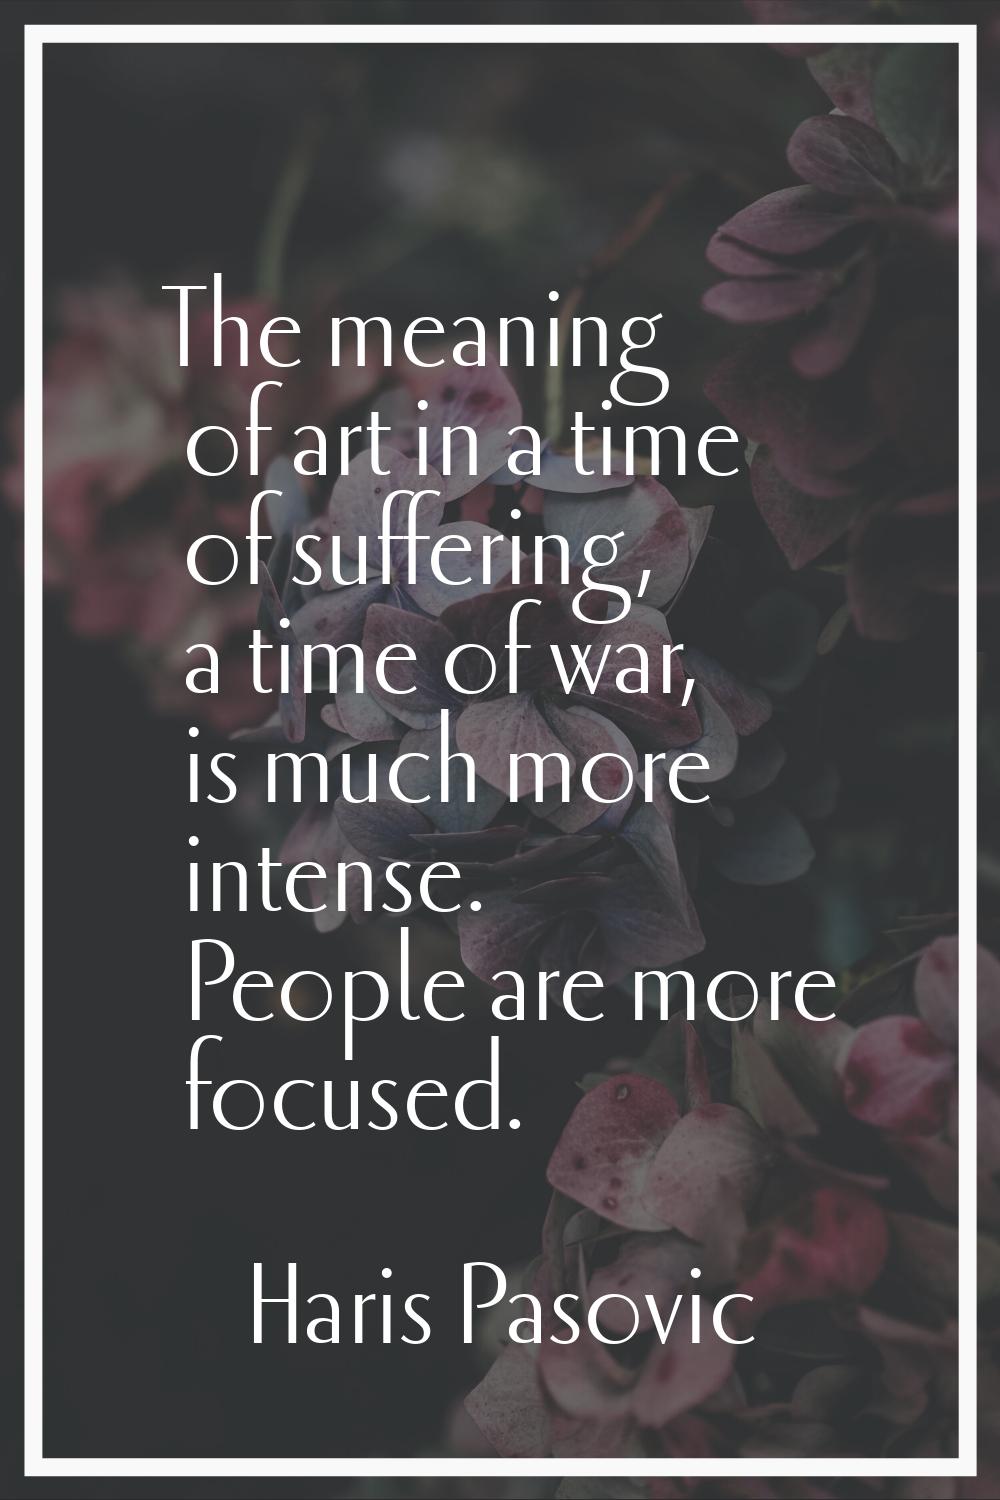 The meaning of art in a time of suffering, a time of war, is much more intense. People are more foc